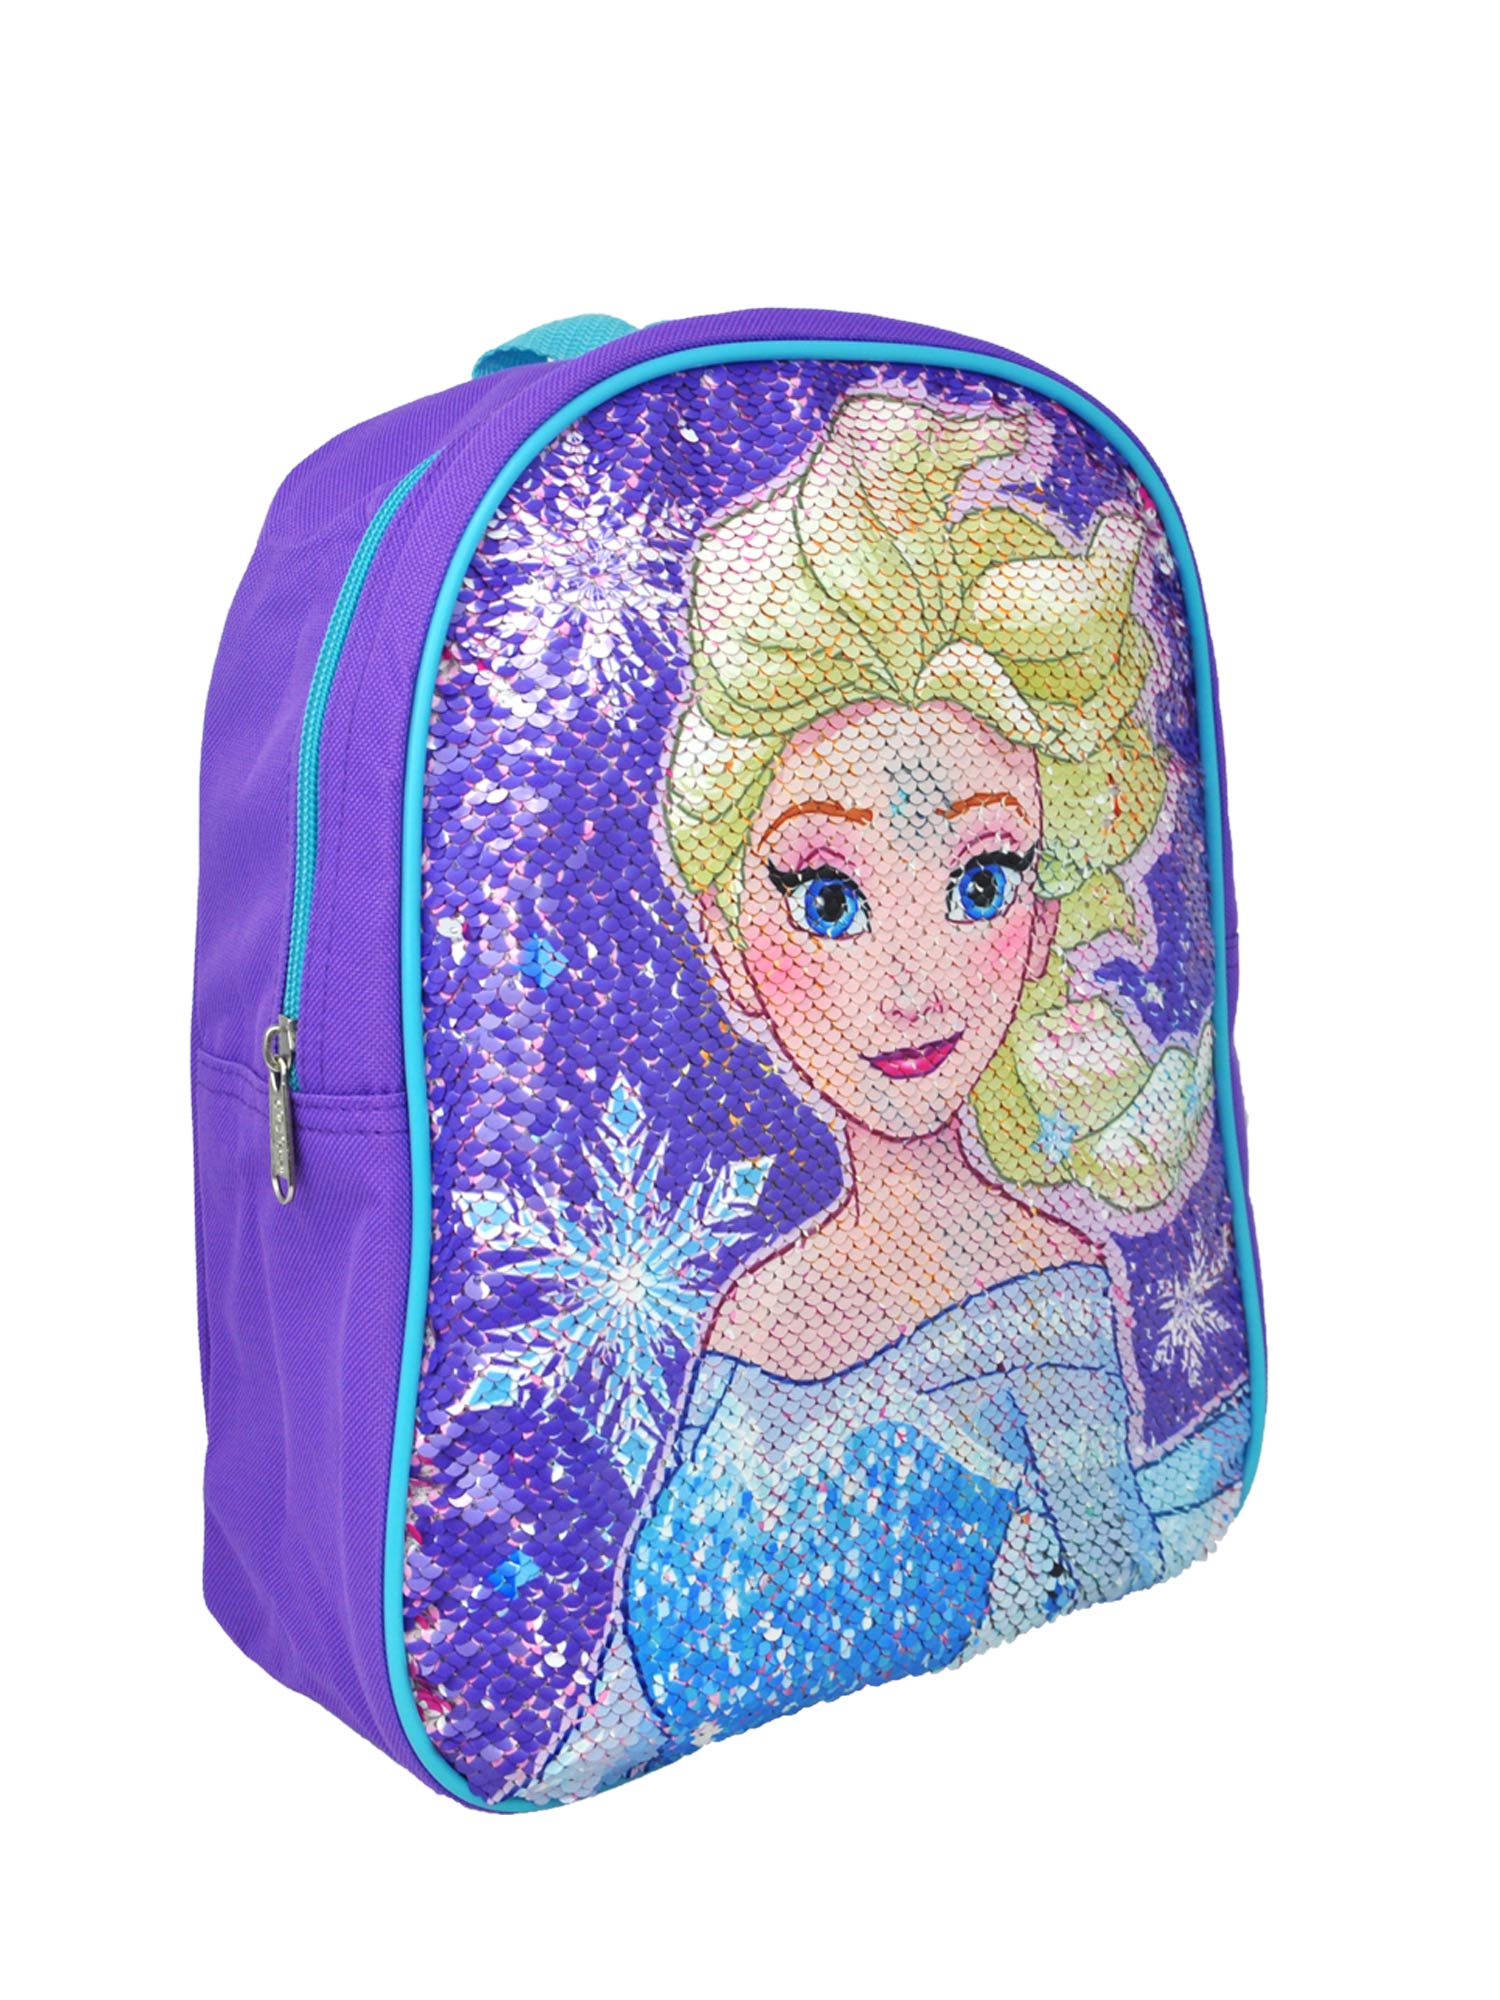 Frozen Girls 12" Small Backpack with Reversible Sequins Elsa Anna Purple - image 3 of 4